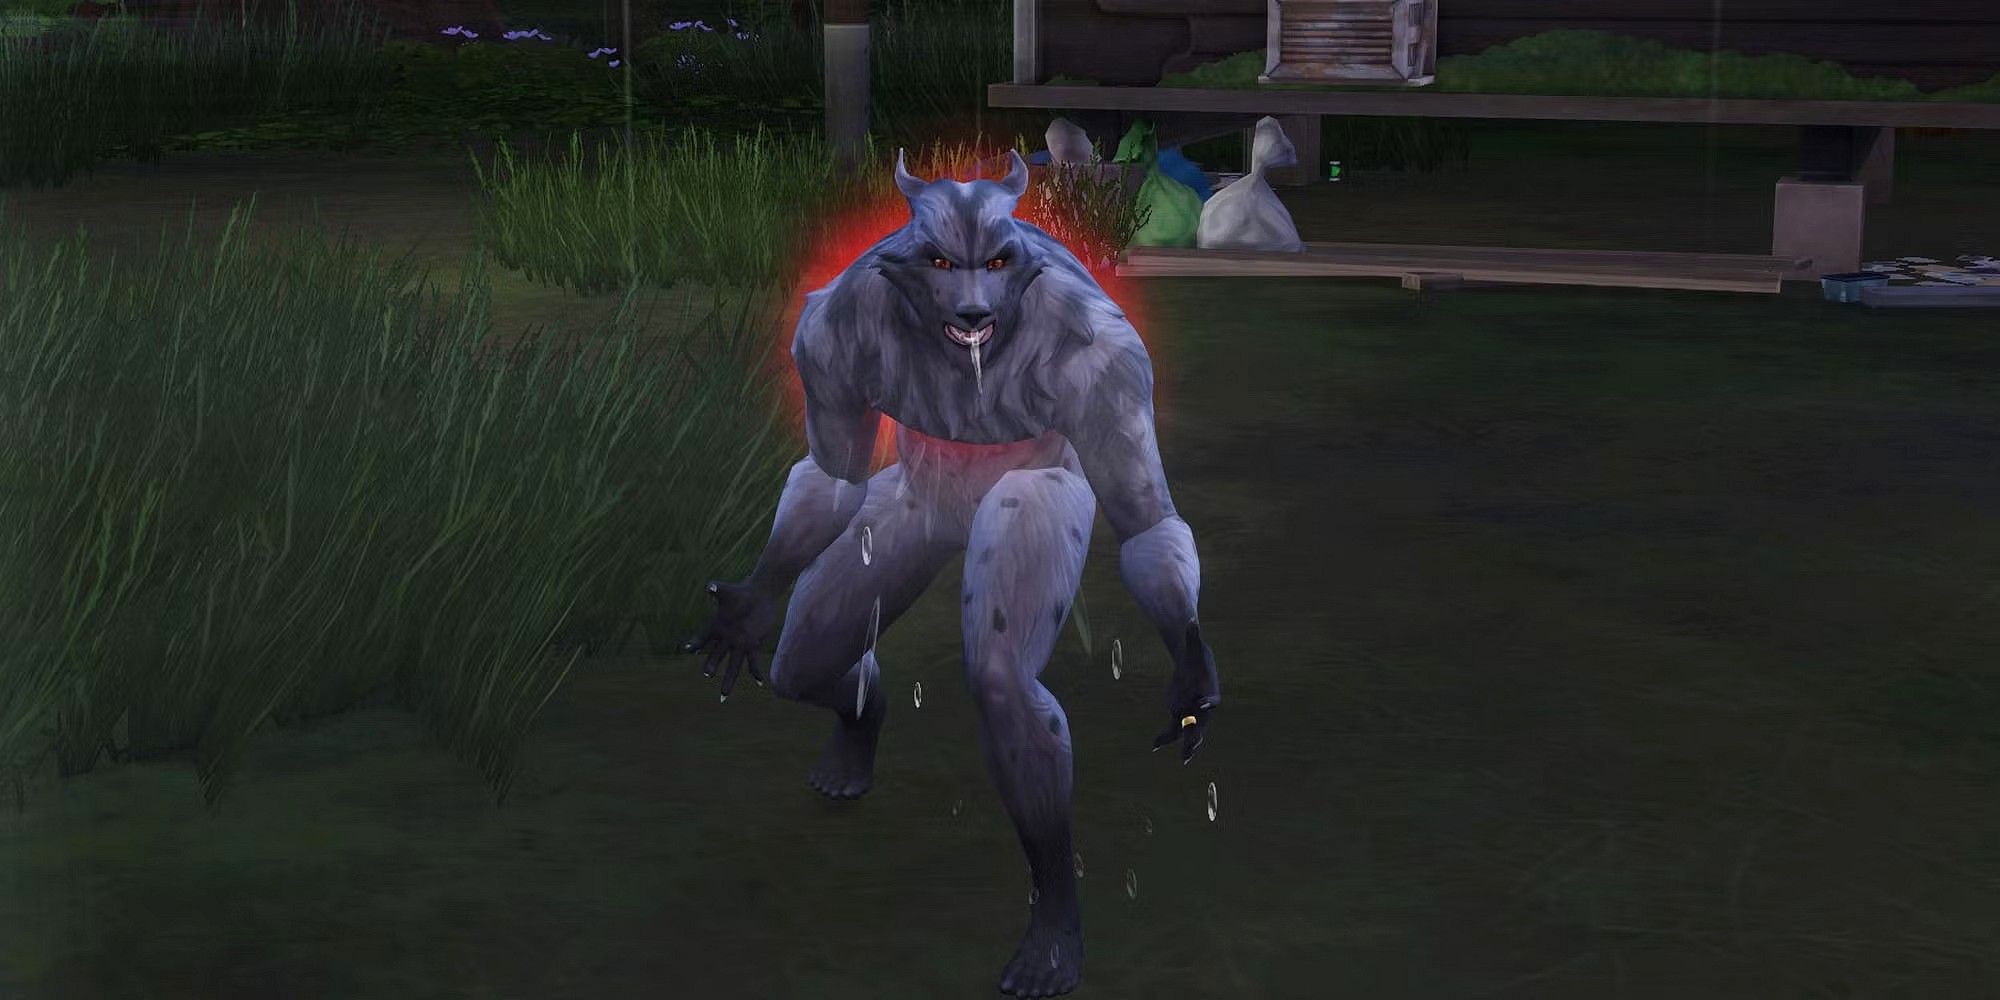 Greg the werewolf from The Sims 4, filled with Fury